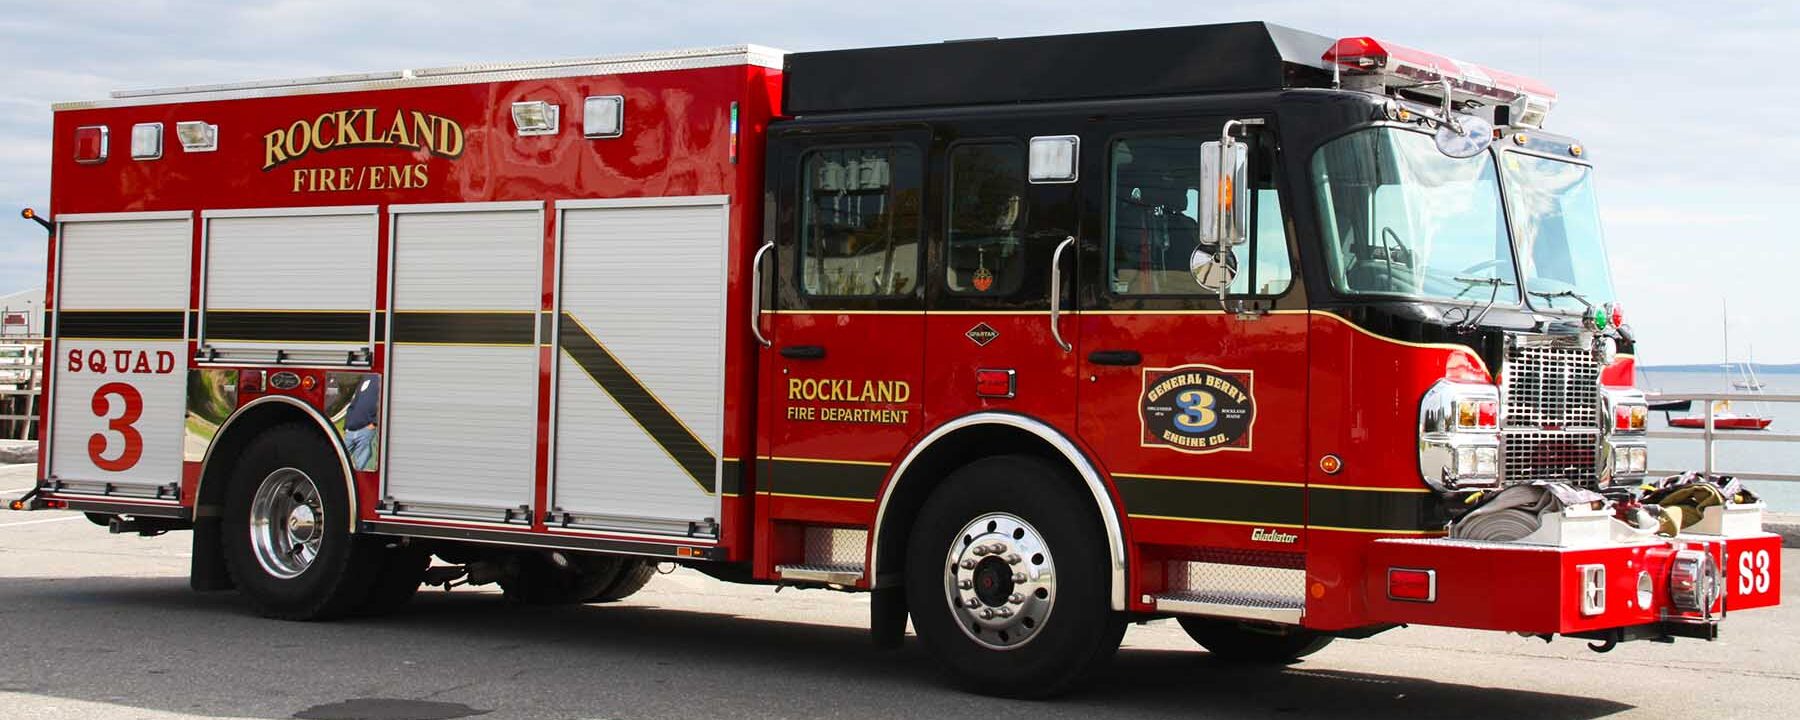 Take a ride with the Rockland Fire Department